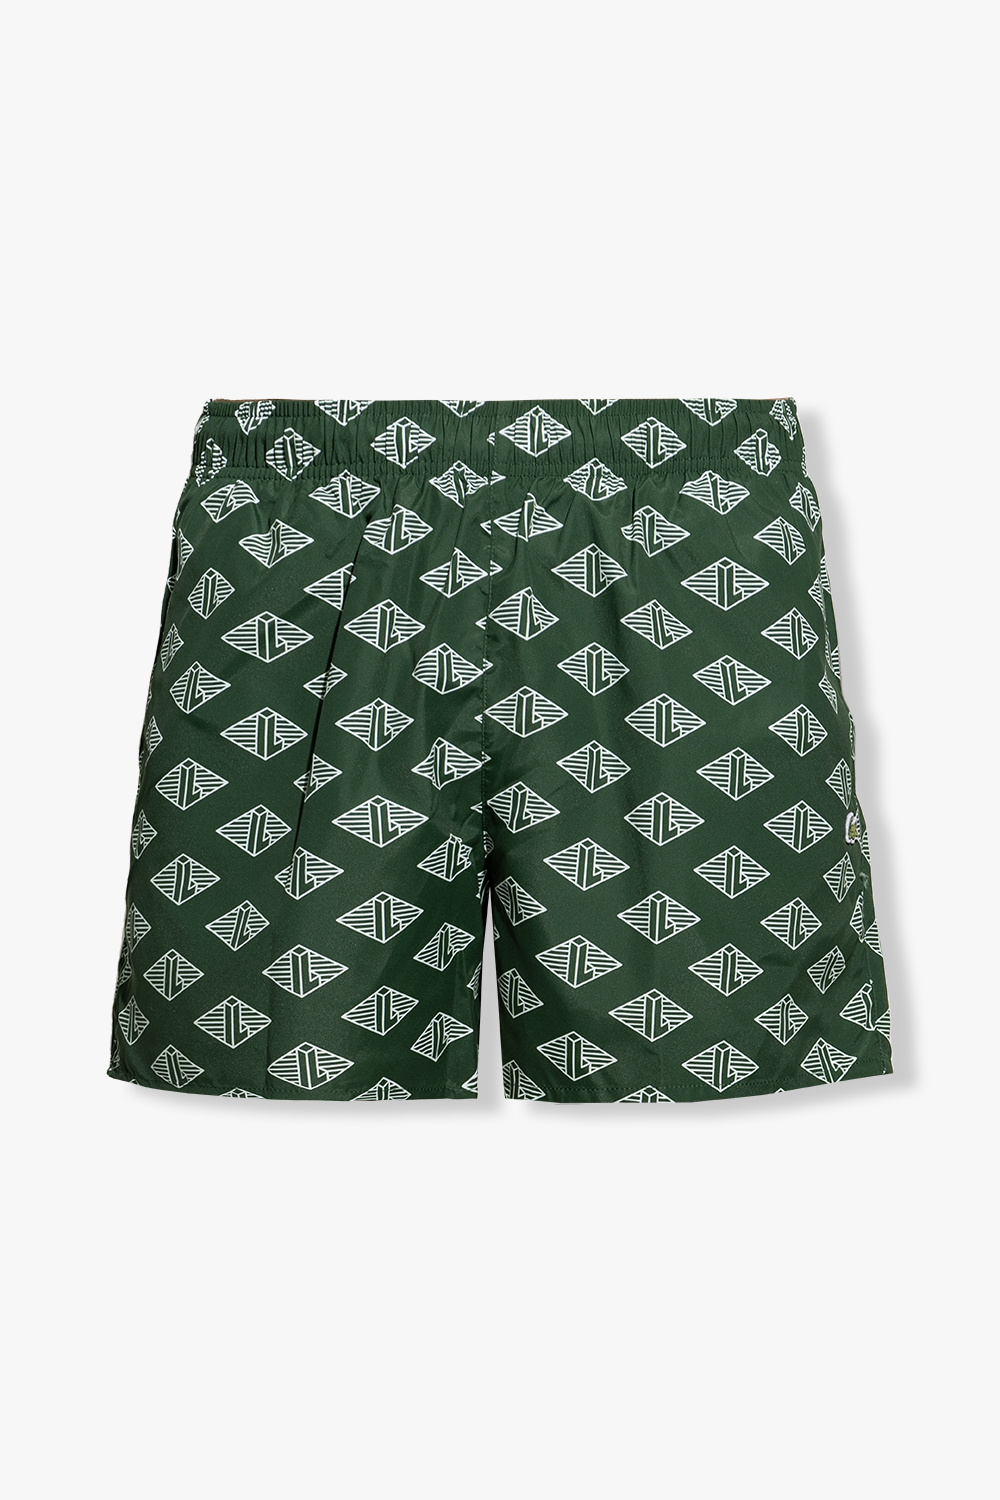 Lacoste Swimming shorts